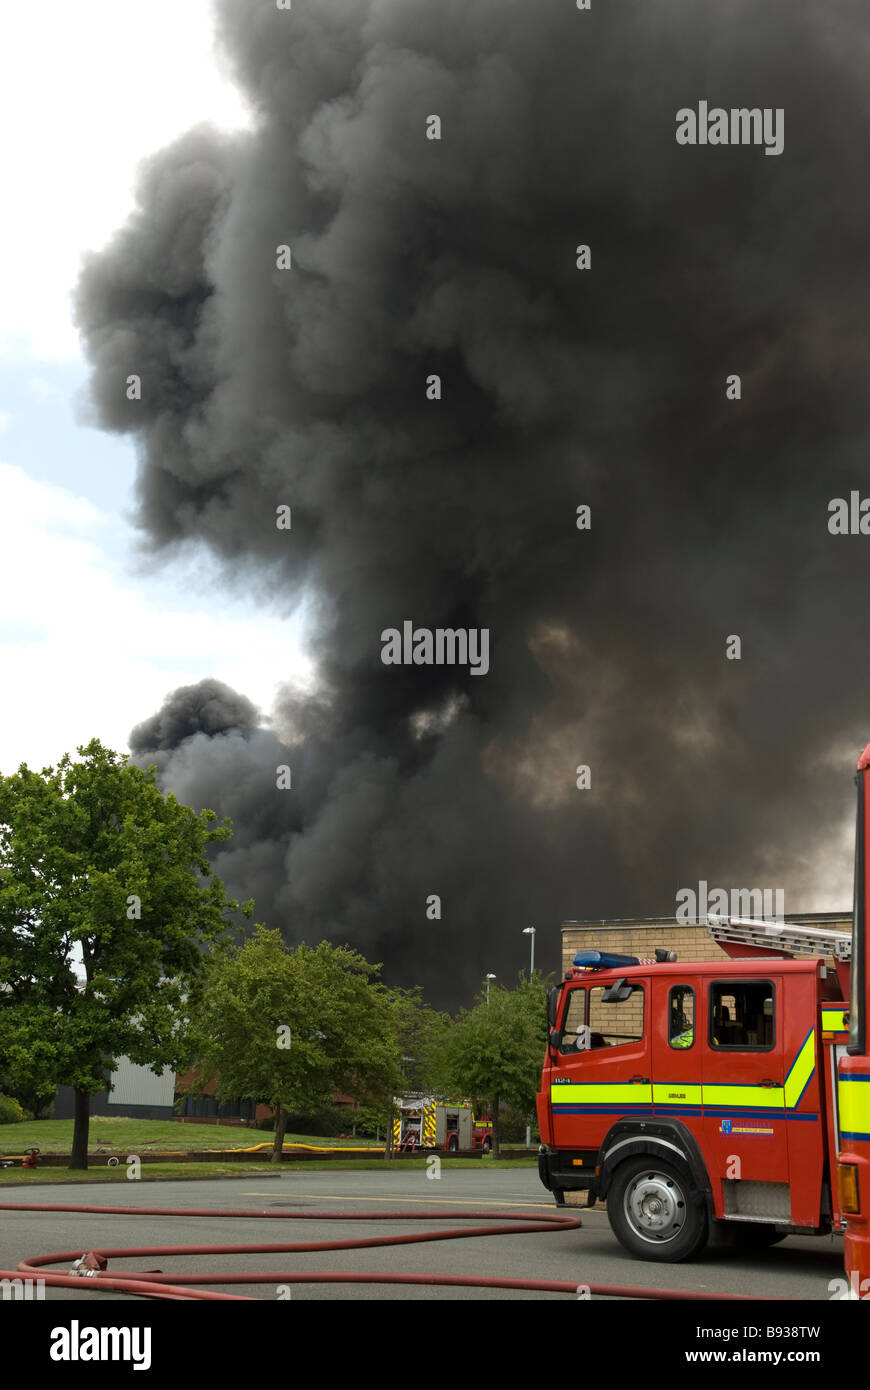 Fire Engine near large black cloud of smoke at factory fire . Portrait Format Stock Photo